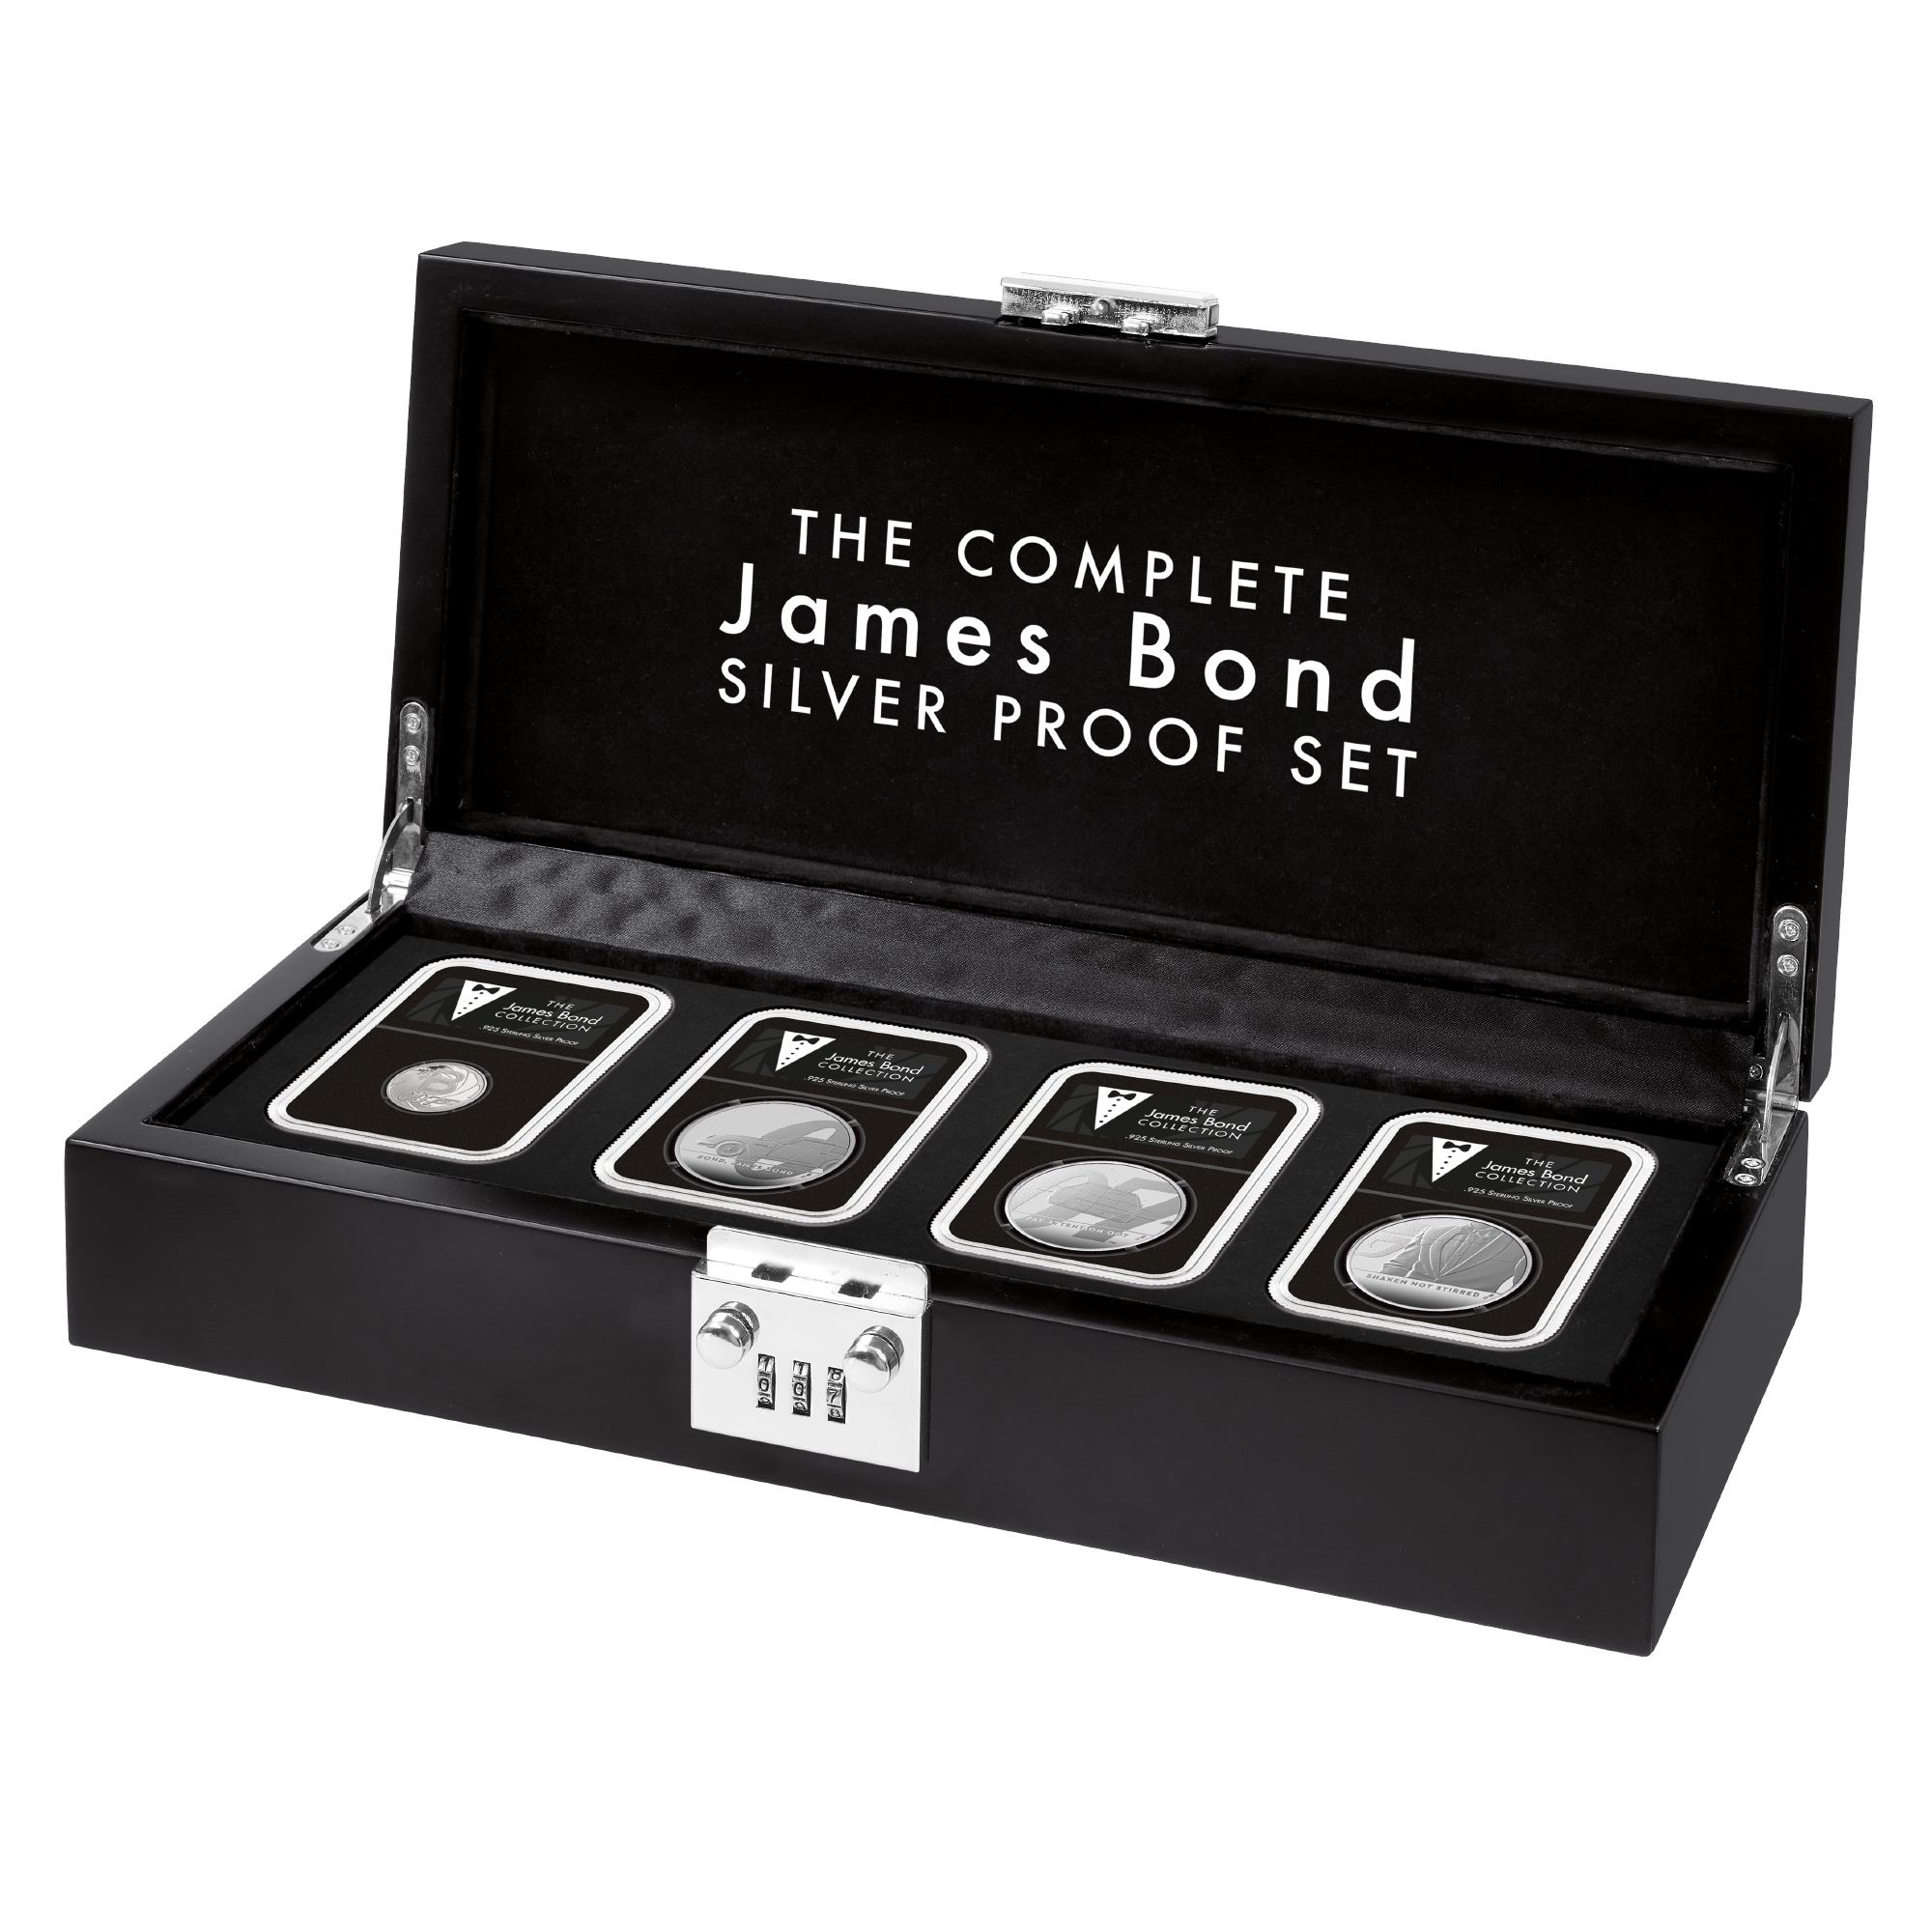 The Complete James Bond Silver Proof Set 10842 0019 a main